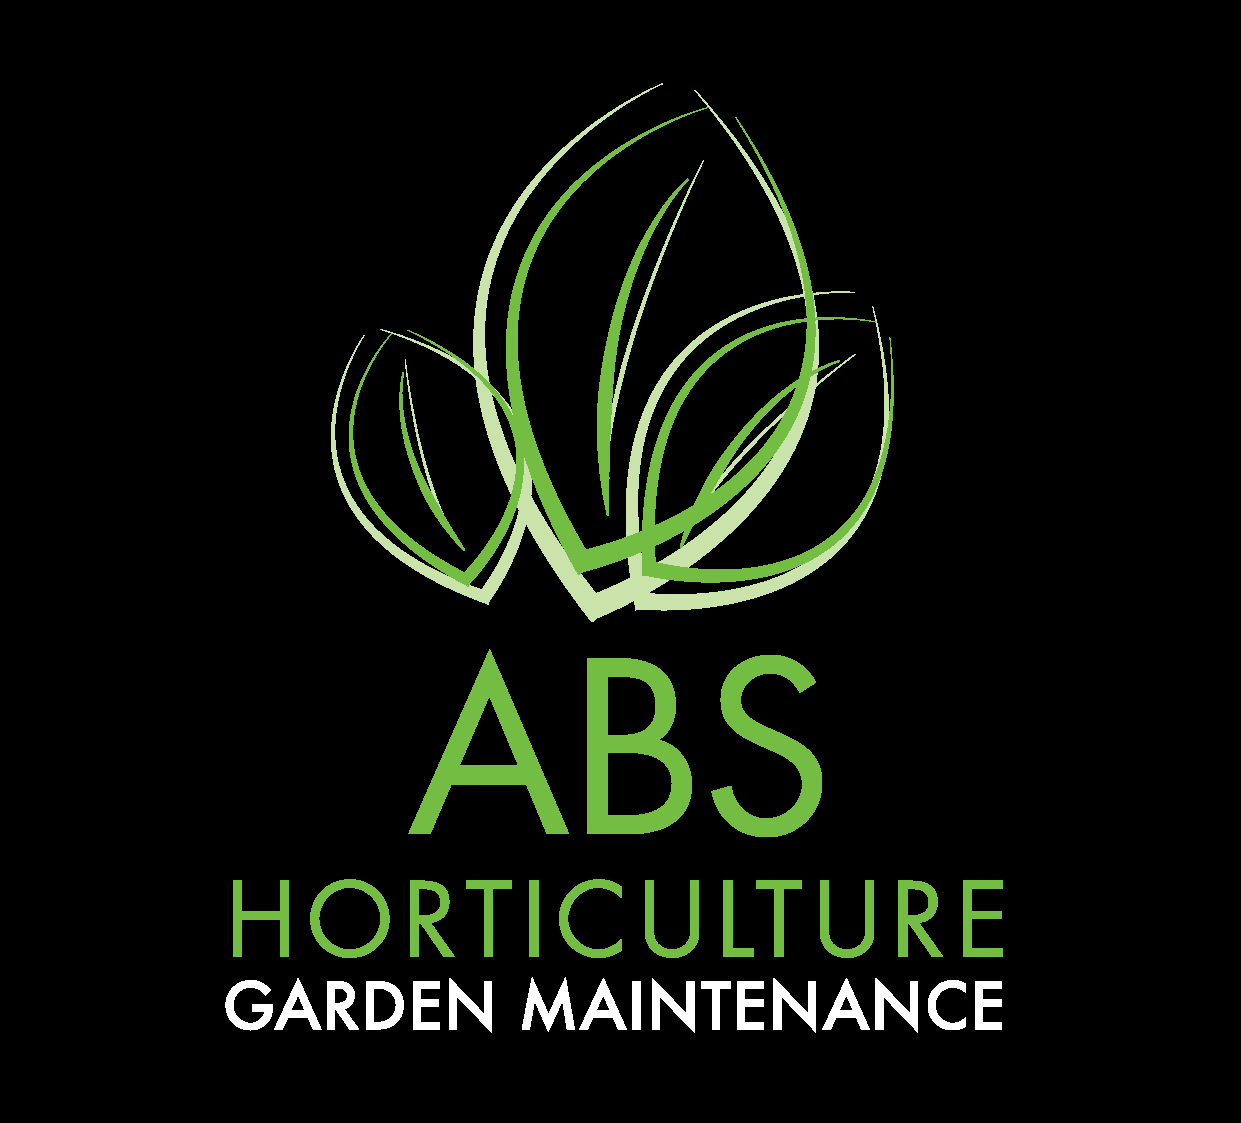 ABS Horticulture